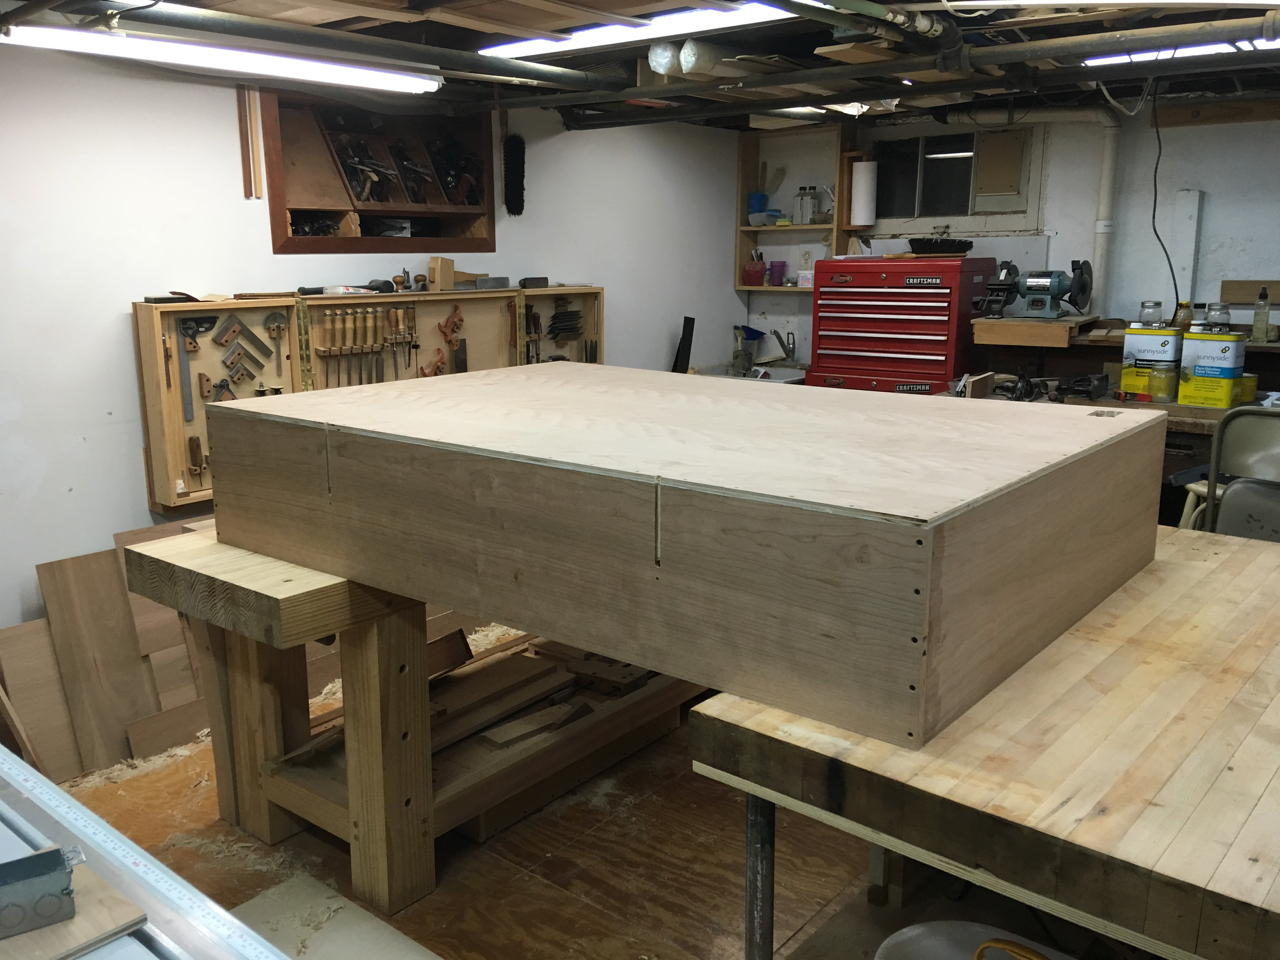 credenza cabinet being assembled